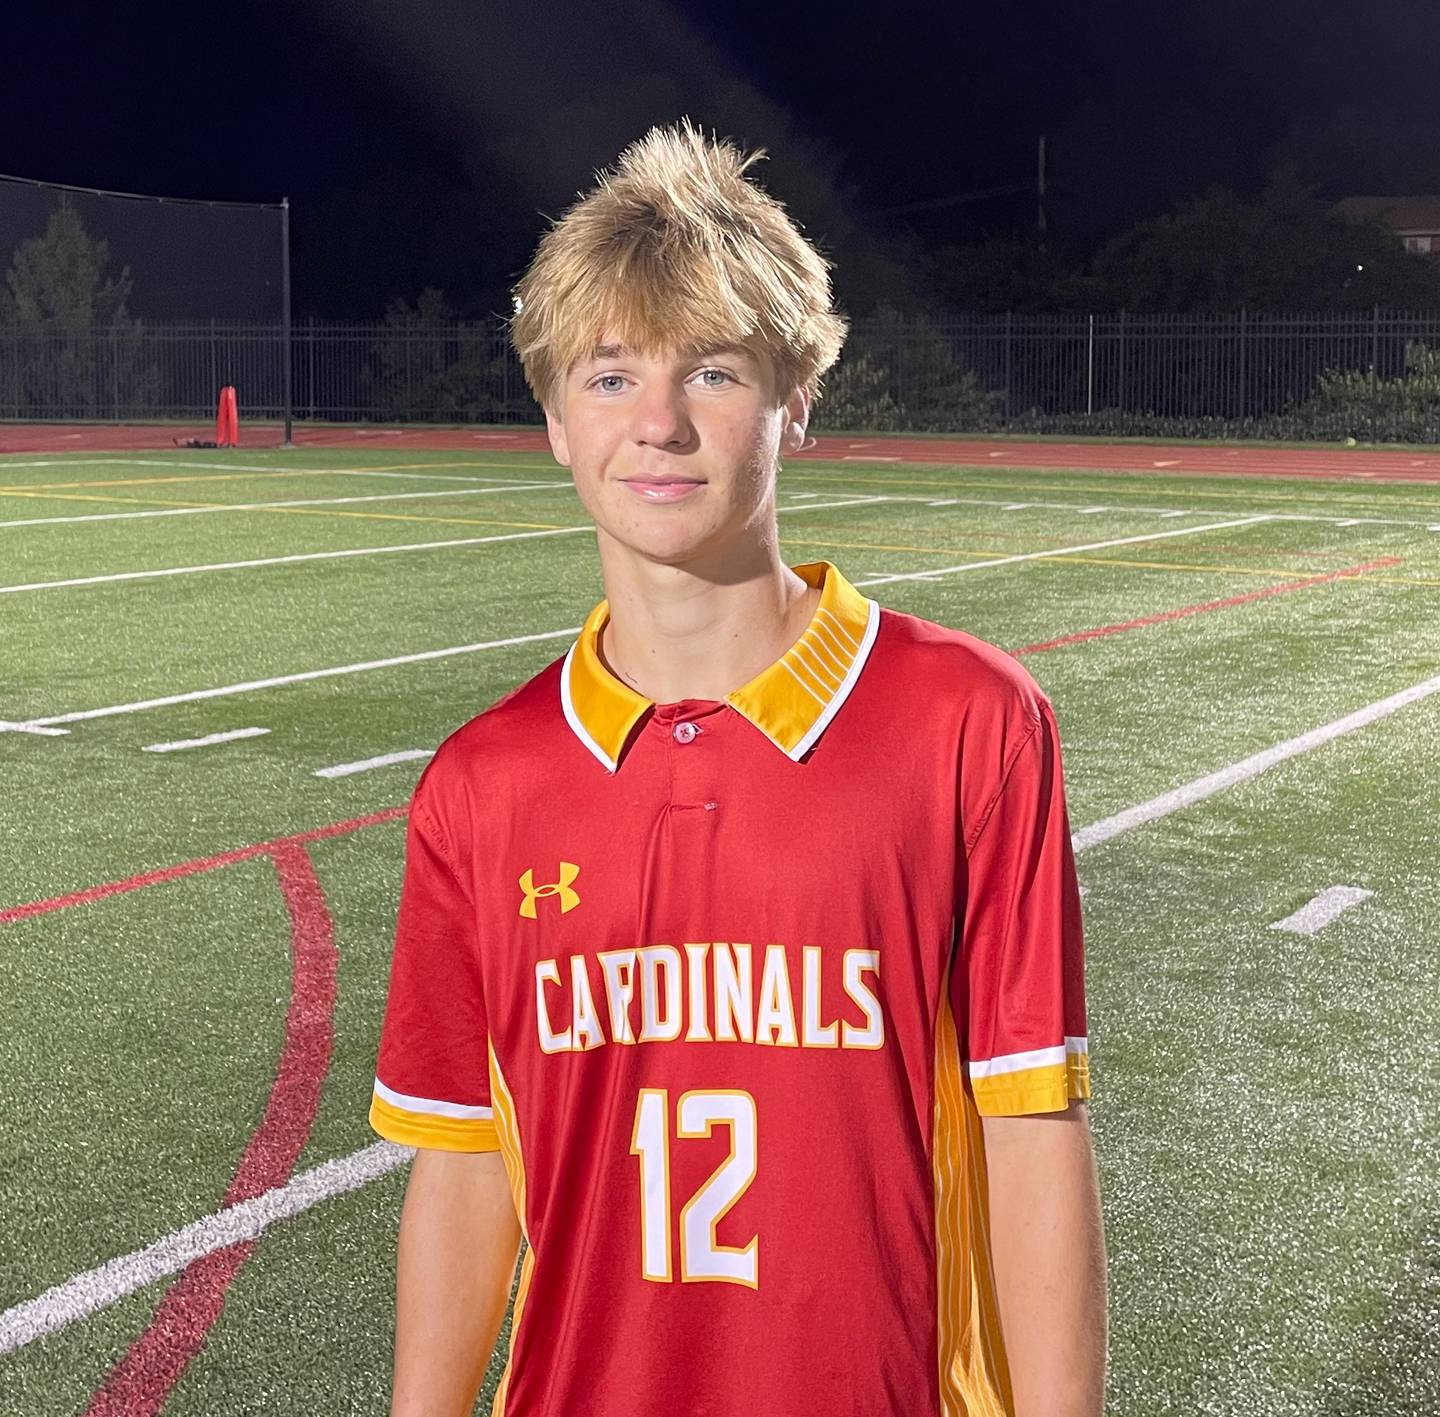 Rich Monath had another big game for Calvert Hall soccer Friday evening. The senior scored twice, leading the No. 1 Cardinals to a 4-1 victory over third-ranked Curley to remain undefeated and keep possession of the Reif Cup.